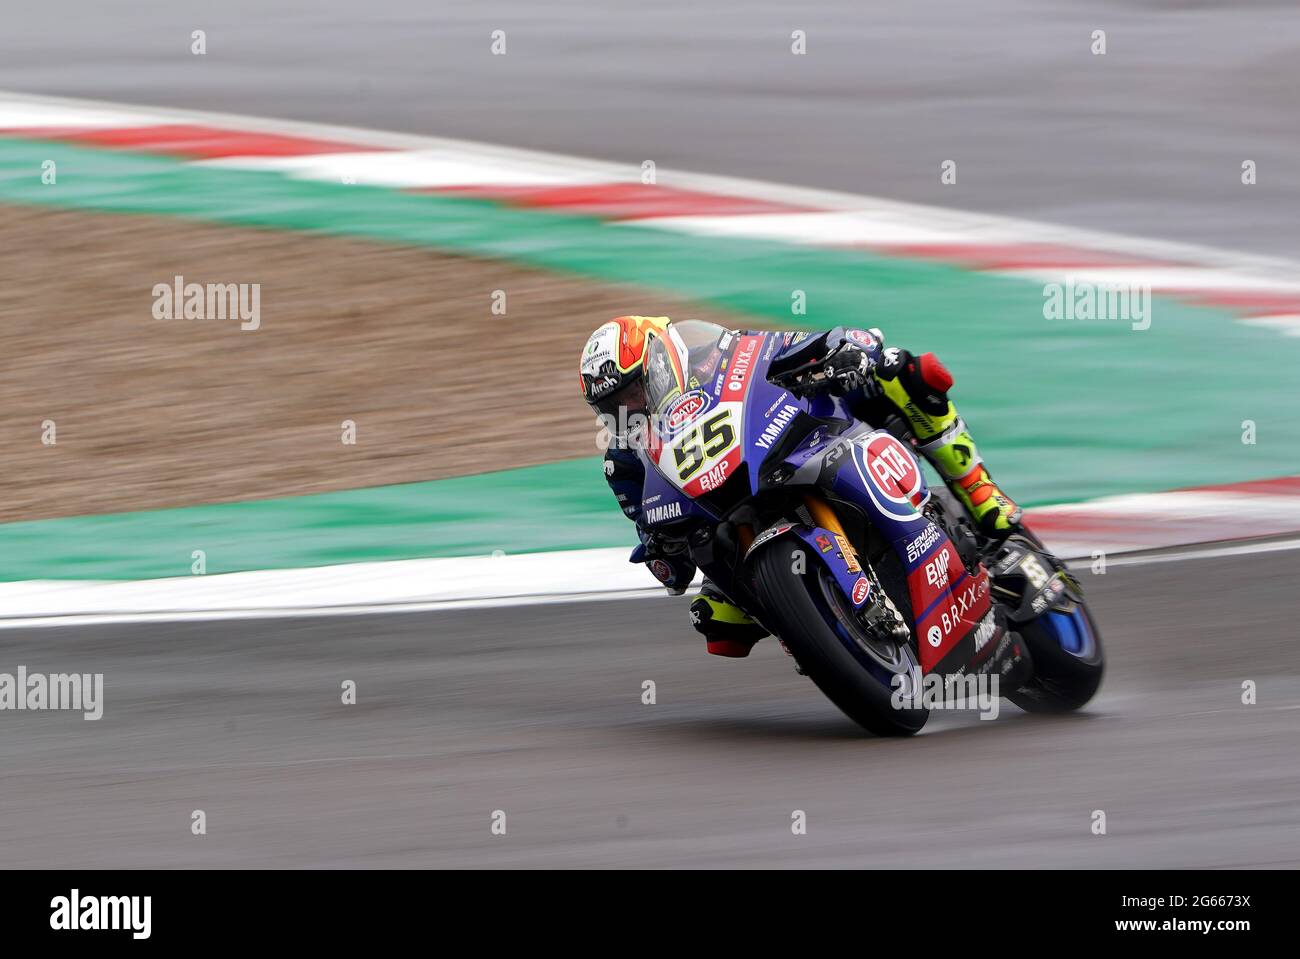 Andrea Locatelli during day one of the Motul Fim Superbike Championship 2021 at Donington Park, Leicestershire. Saturday July 3, 2021. Stock Photo